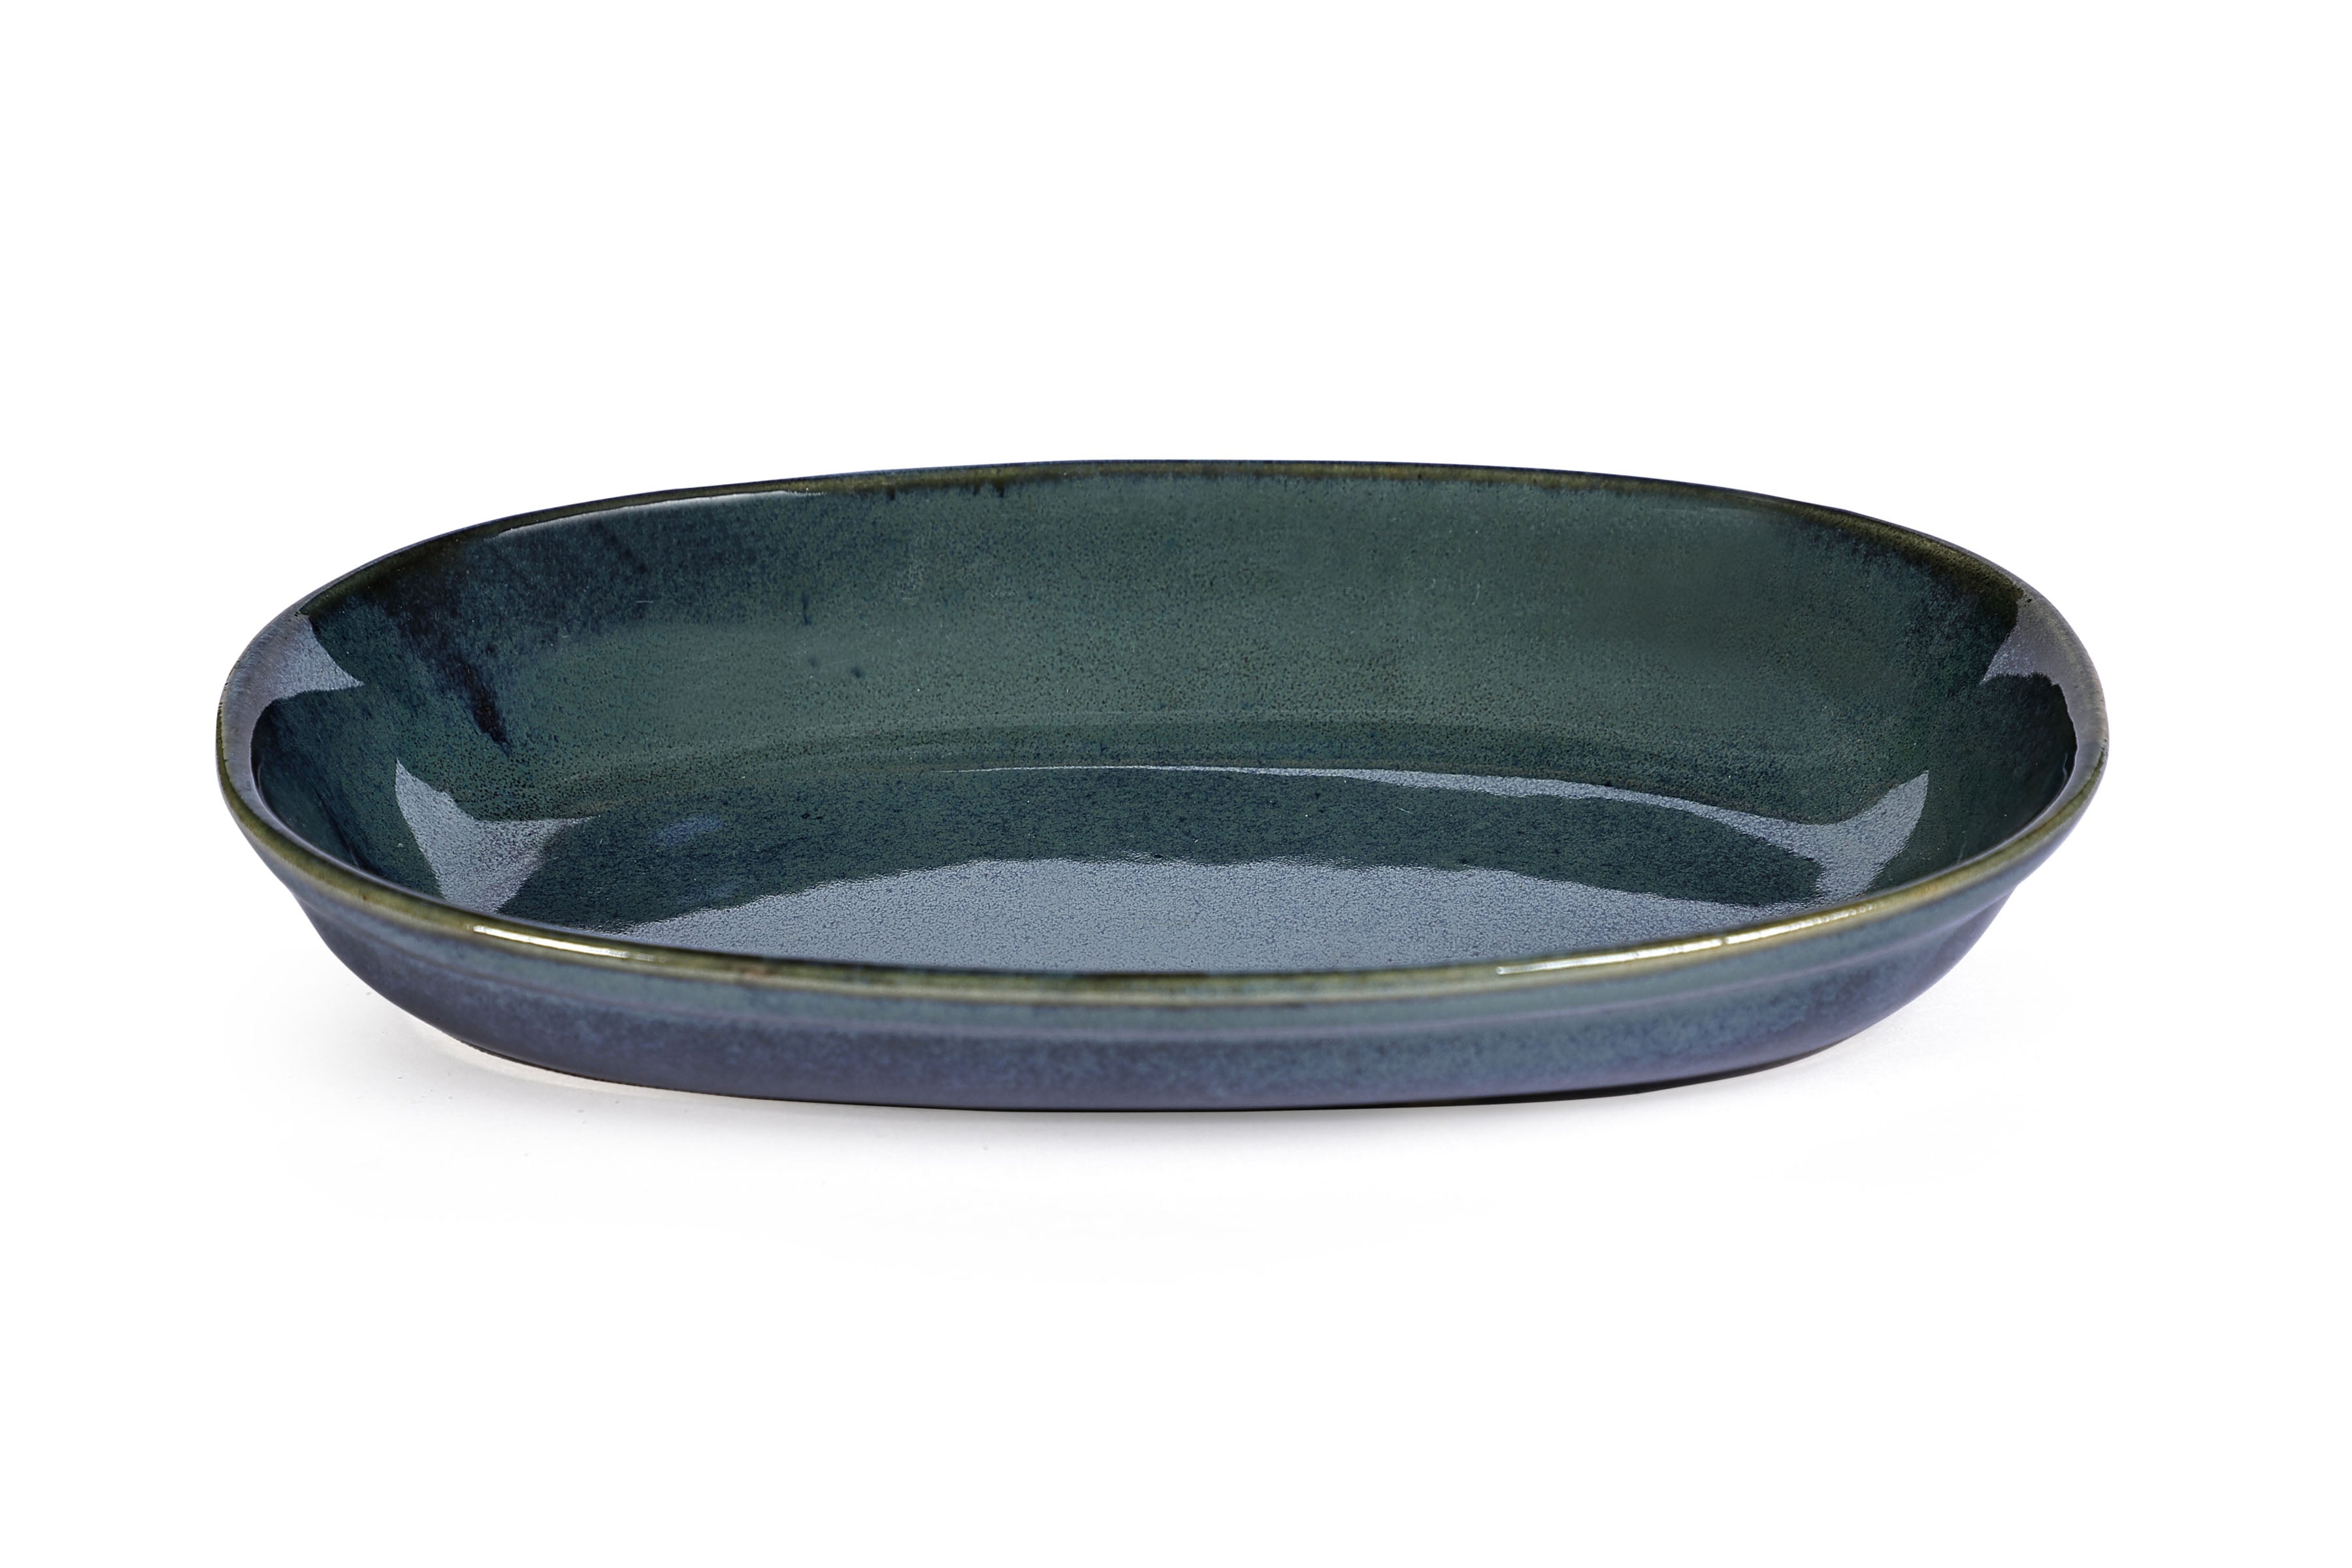 Ceramic Oval Platter, Green  L 8 x W 5 x H 1 Inches ( Set of 2)